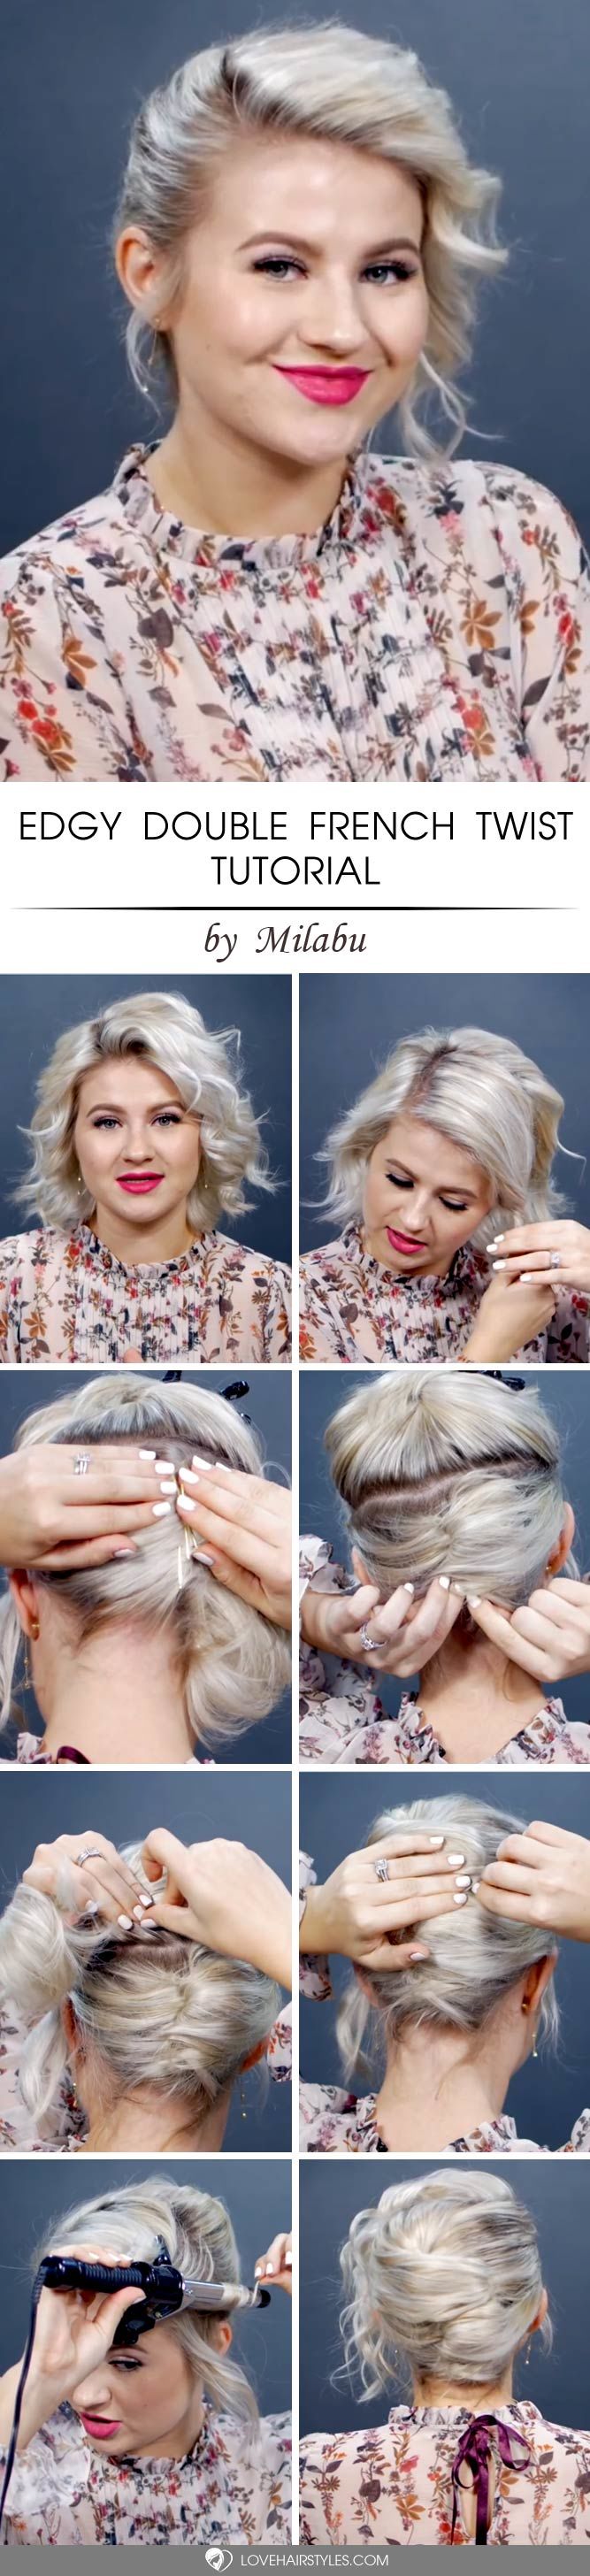 Edgy Double French Twist Tutorial #updo #hairtutorial